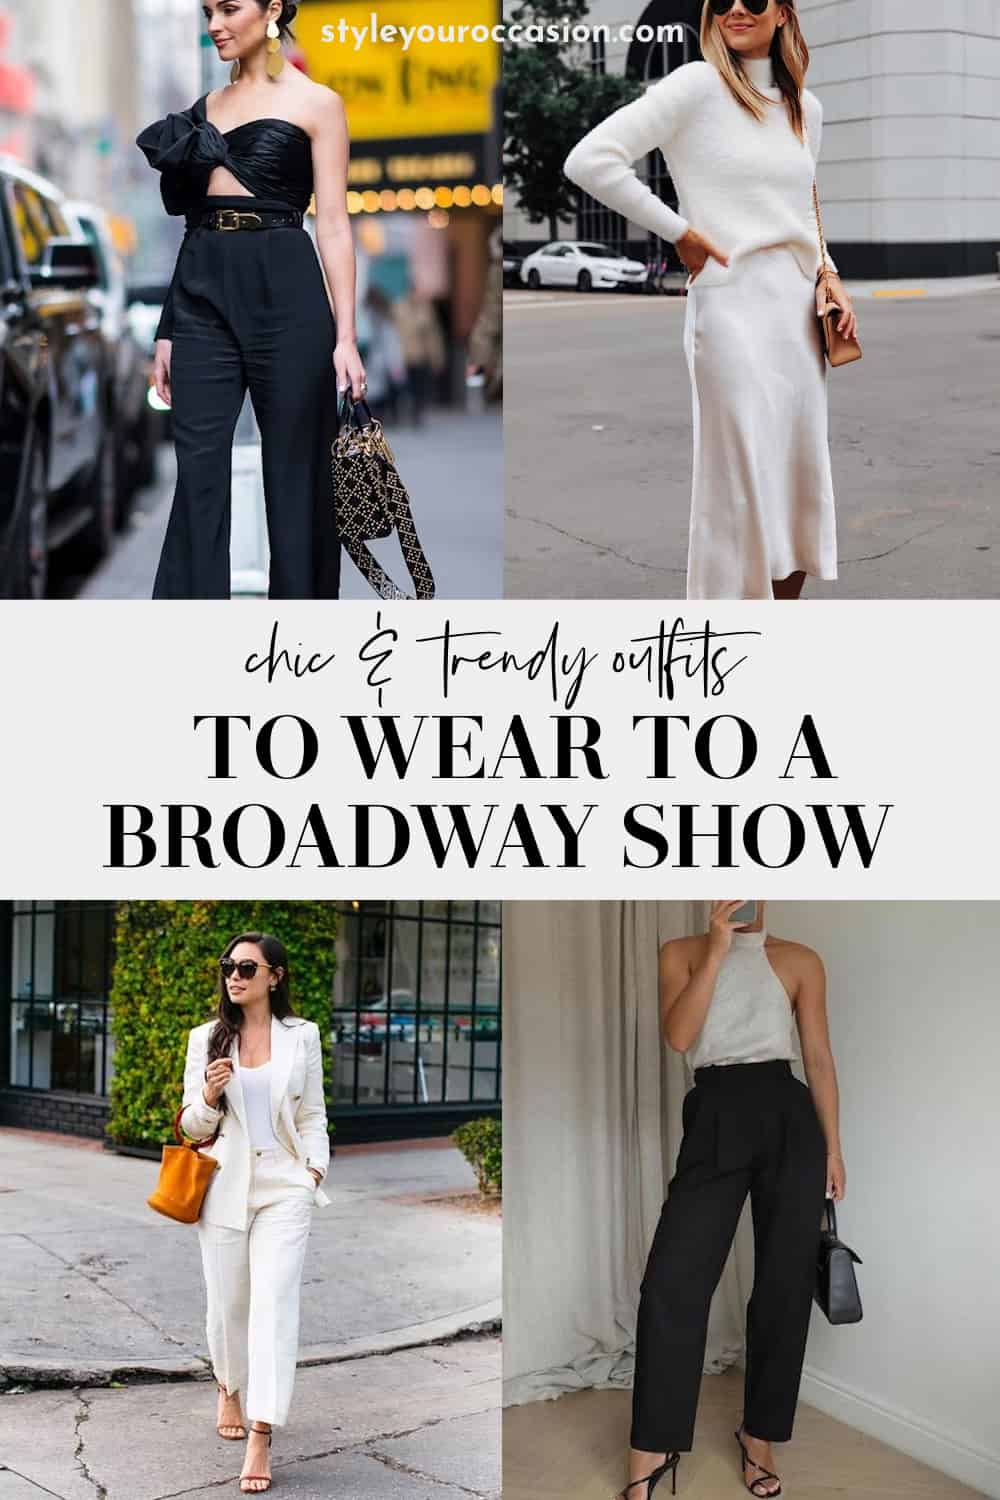 What To Wear To A Broadway Show + 8 Chic Outfit Ideas